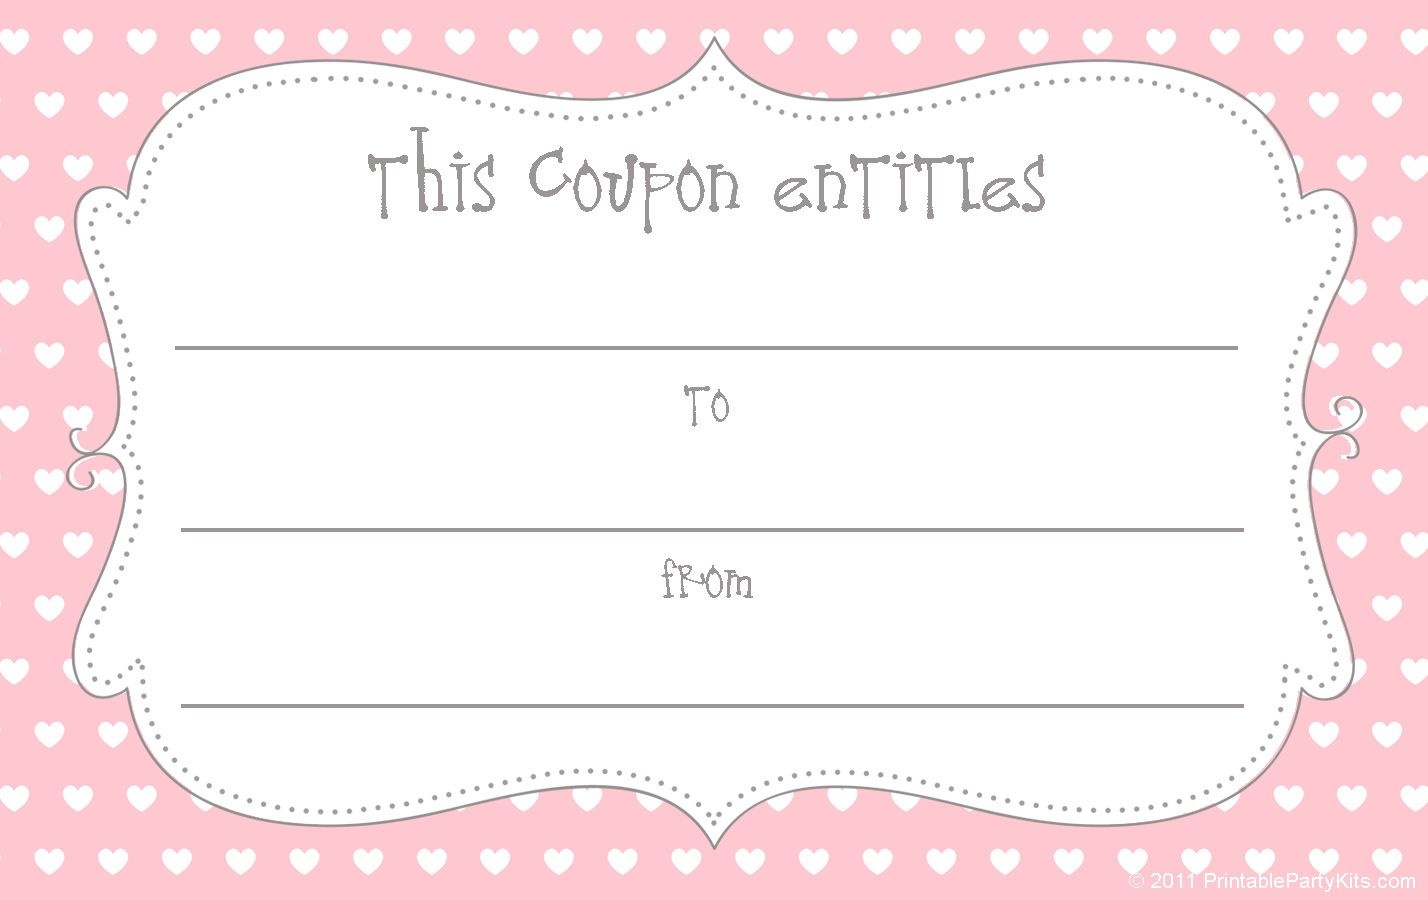 15 Sets Of Free Printable Love Coupons And Templates - Free Printable Love Coupons For Wife